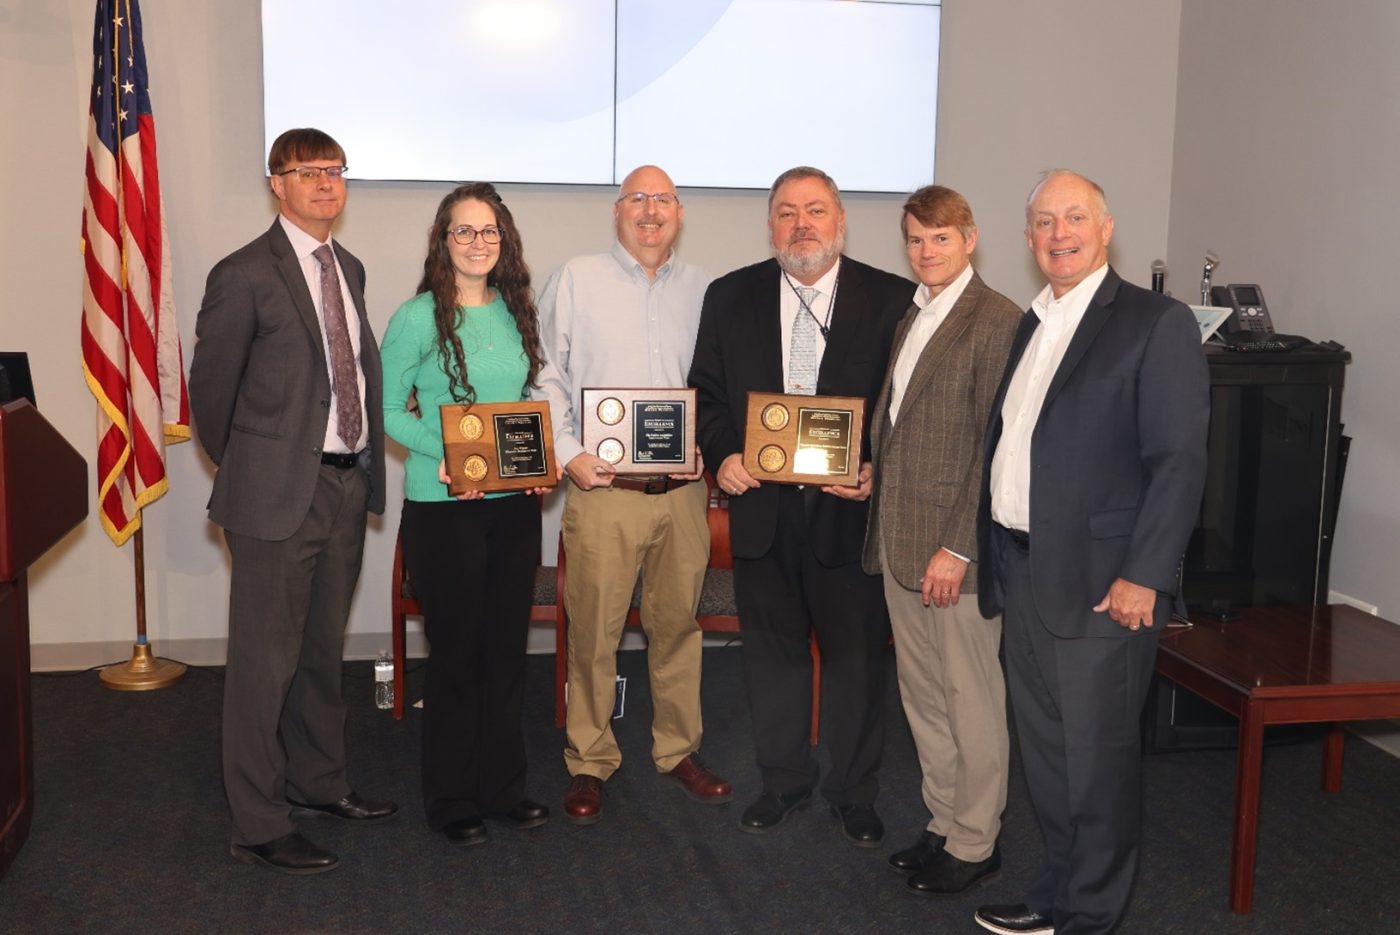 Six people representing the NNSS and NNSA stand with three award plaques.